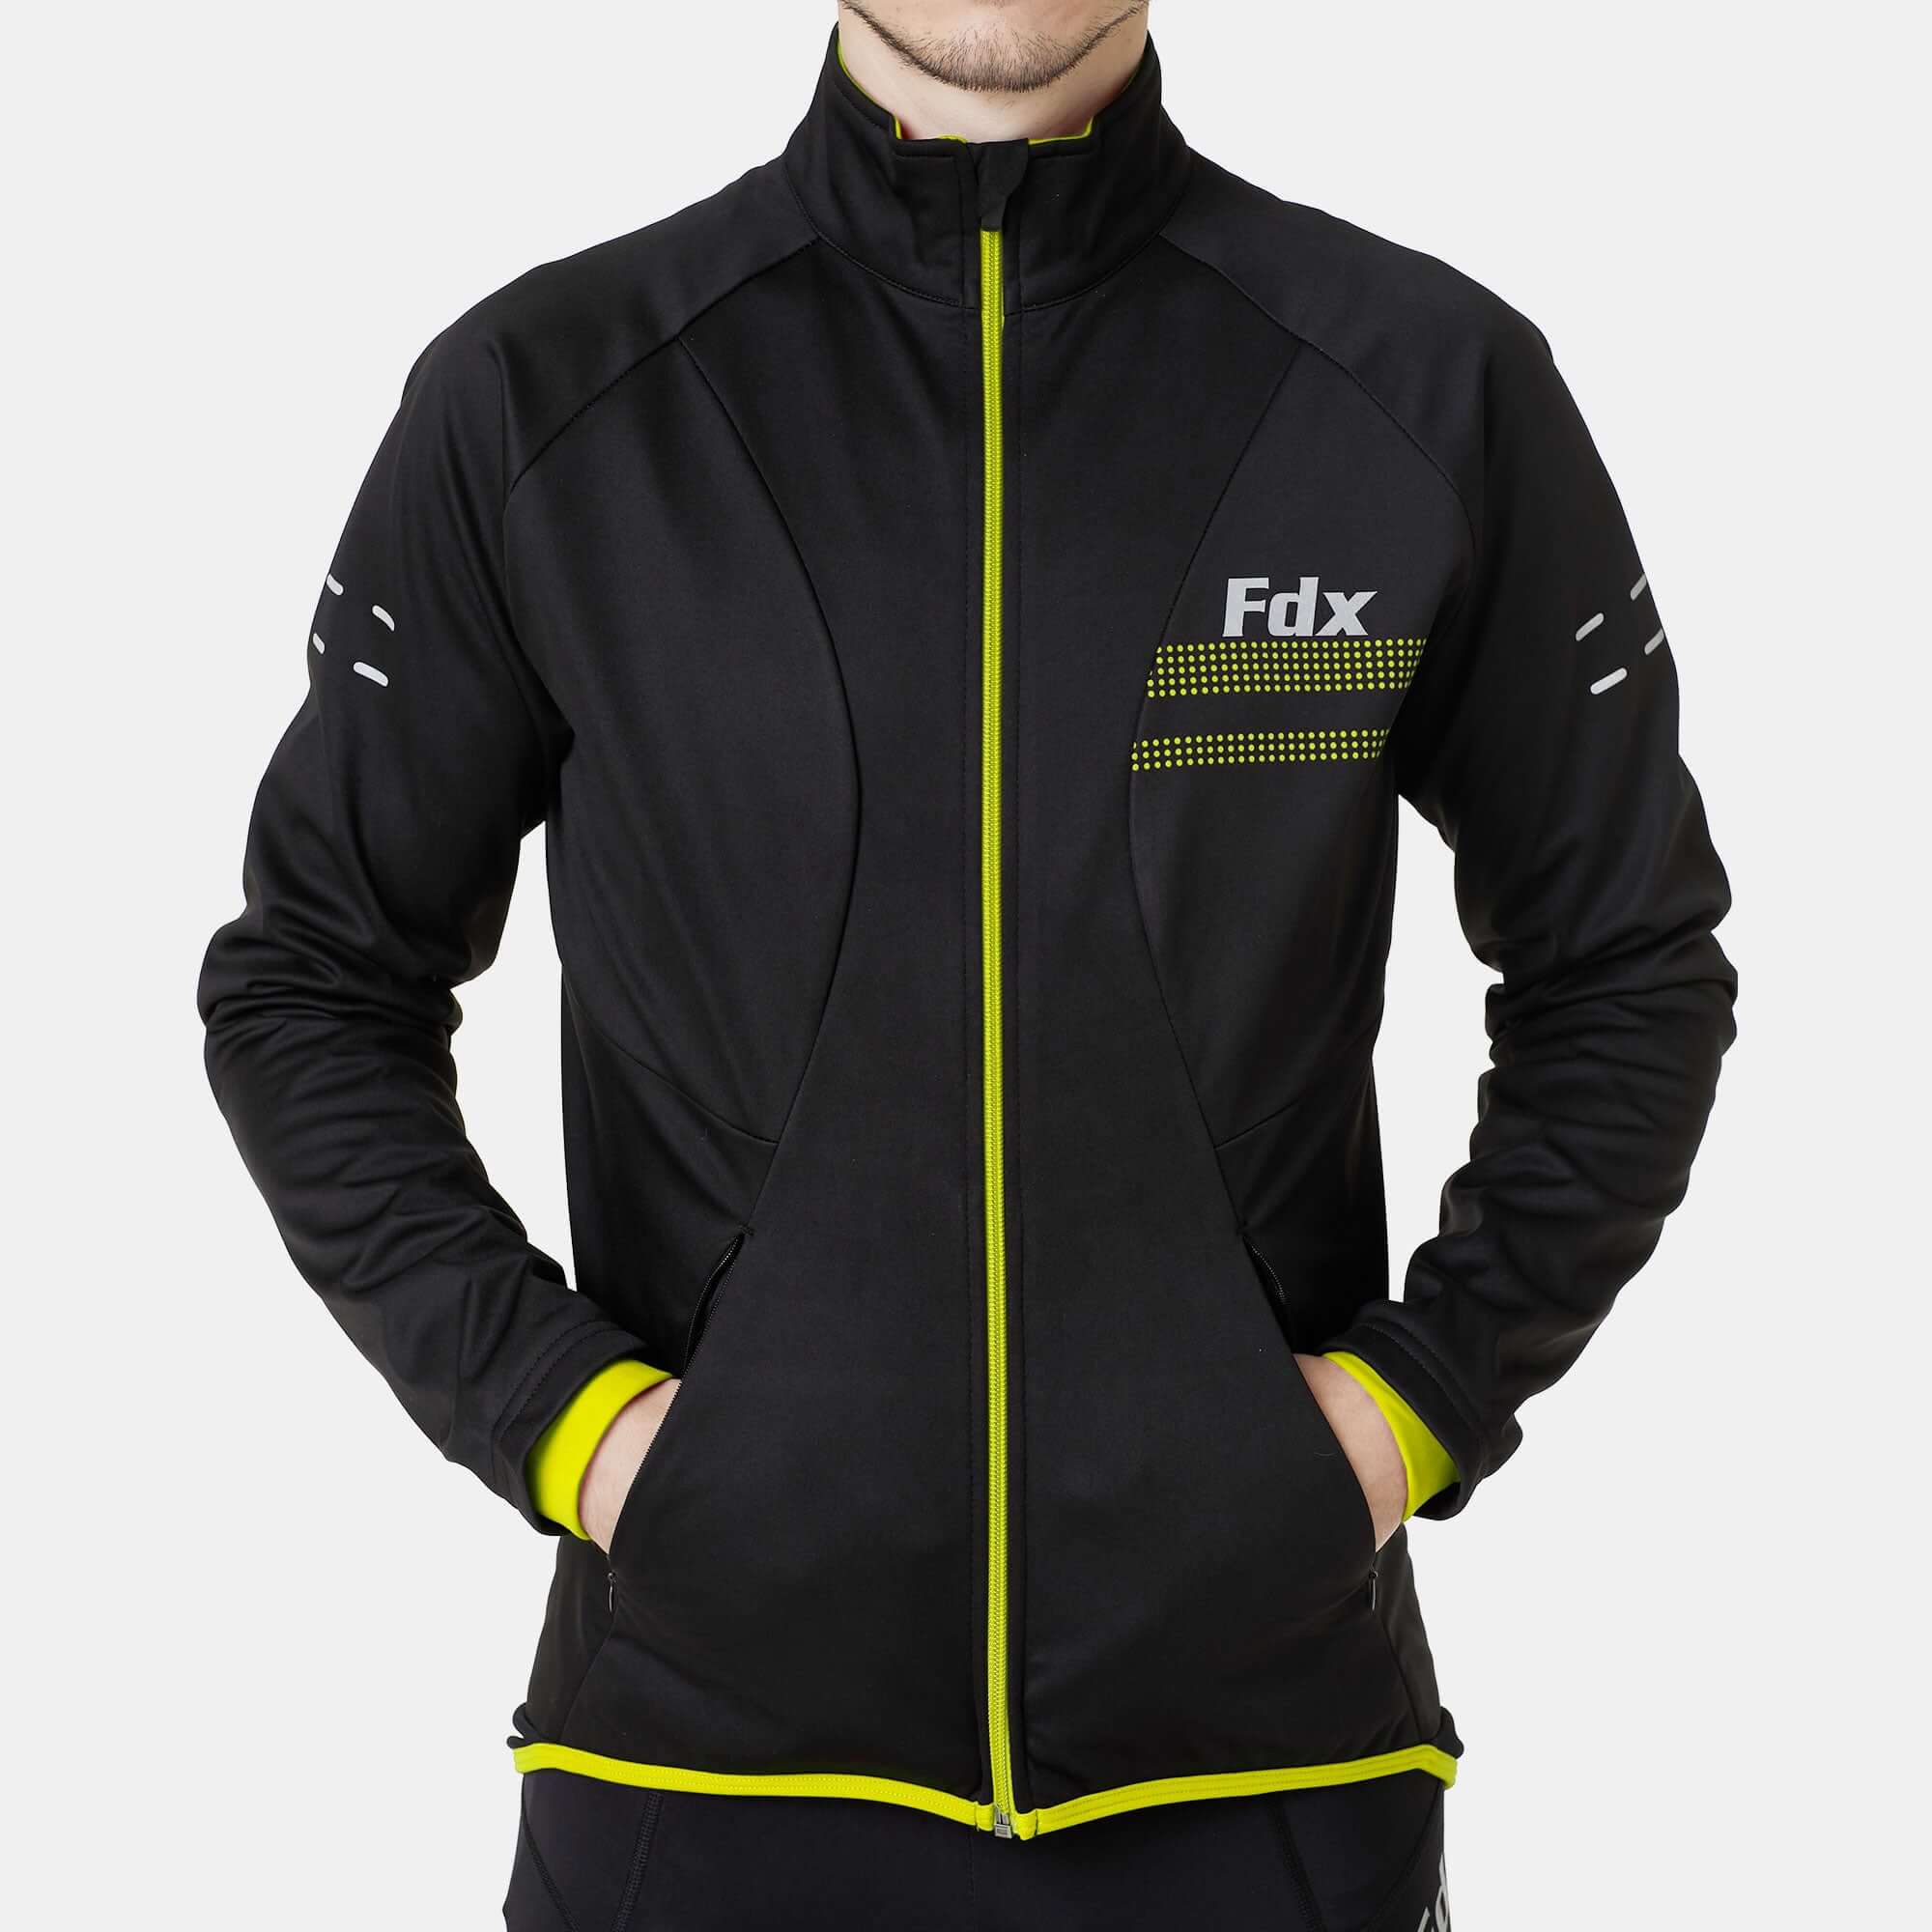 Fdx Men's Windbreaker Cycling Black & Yellow Jacket for Winter Thermal Casual Softshell Clothing Lightweight, Windproof, Waterproof & Pockets - Arch